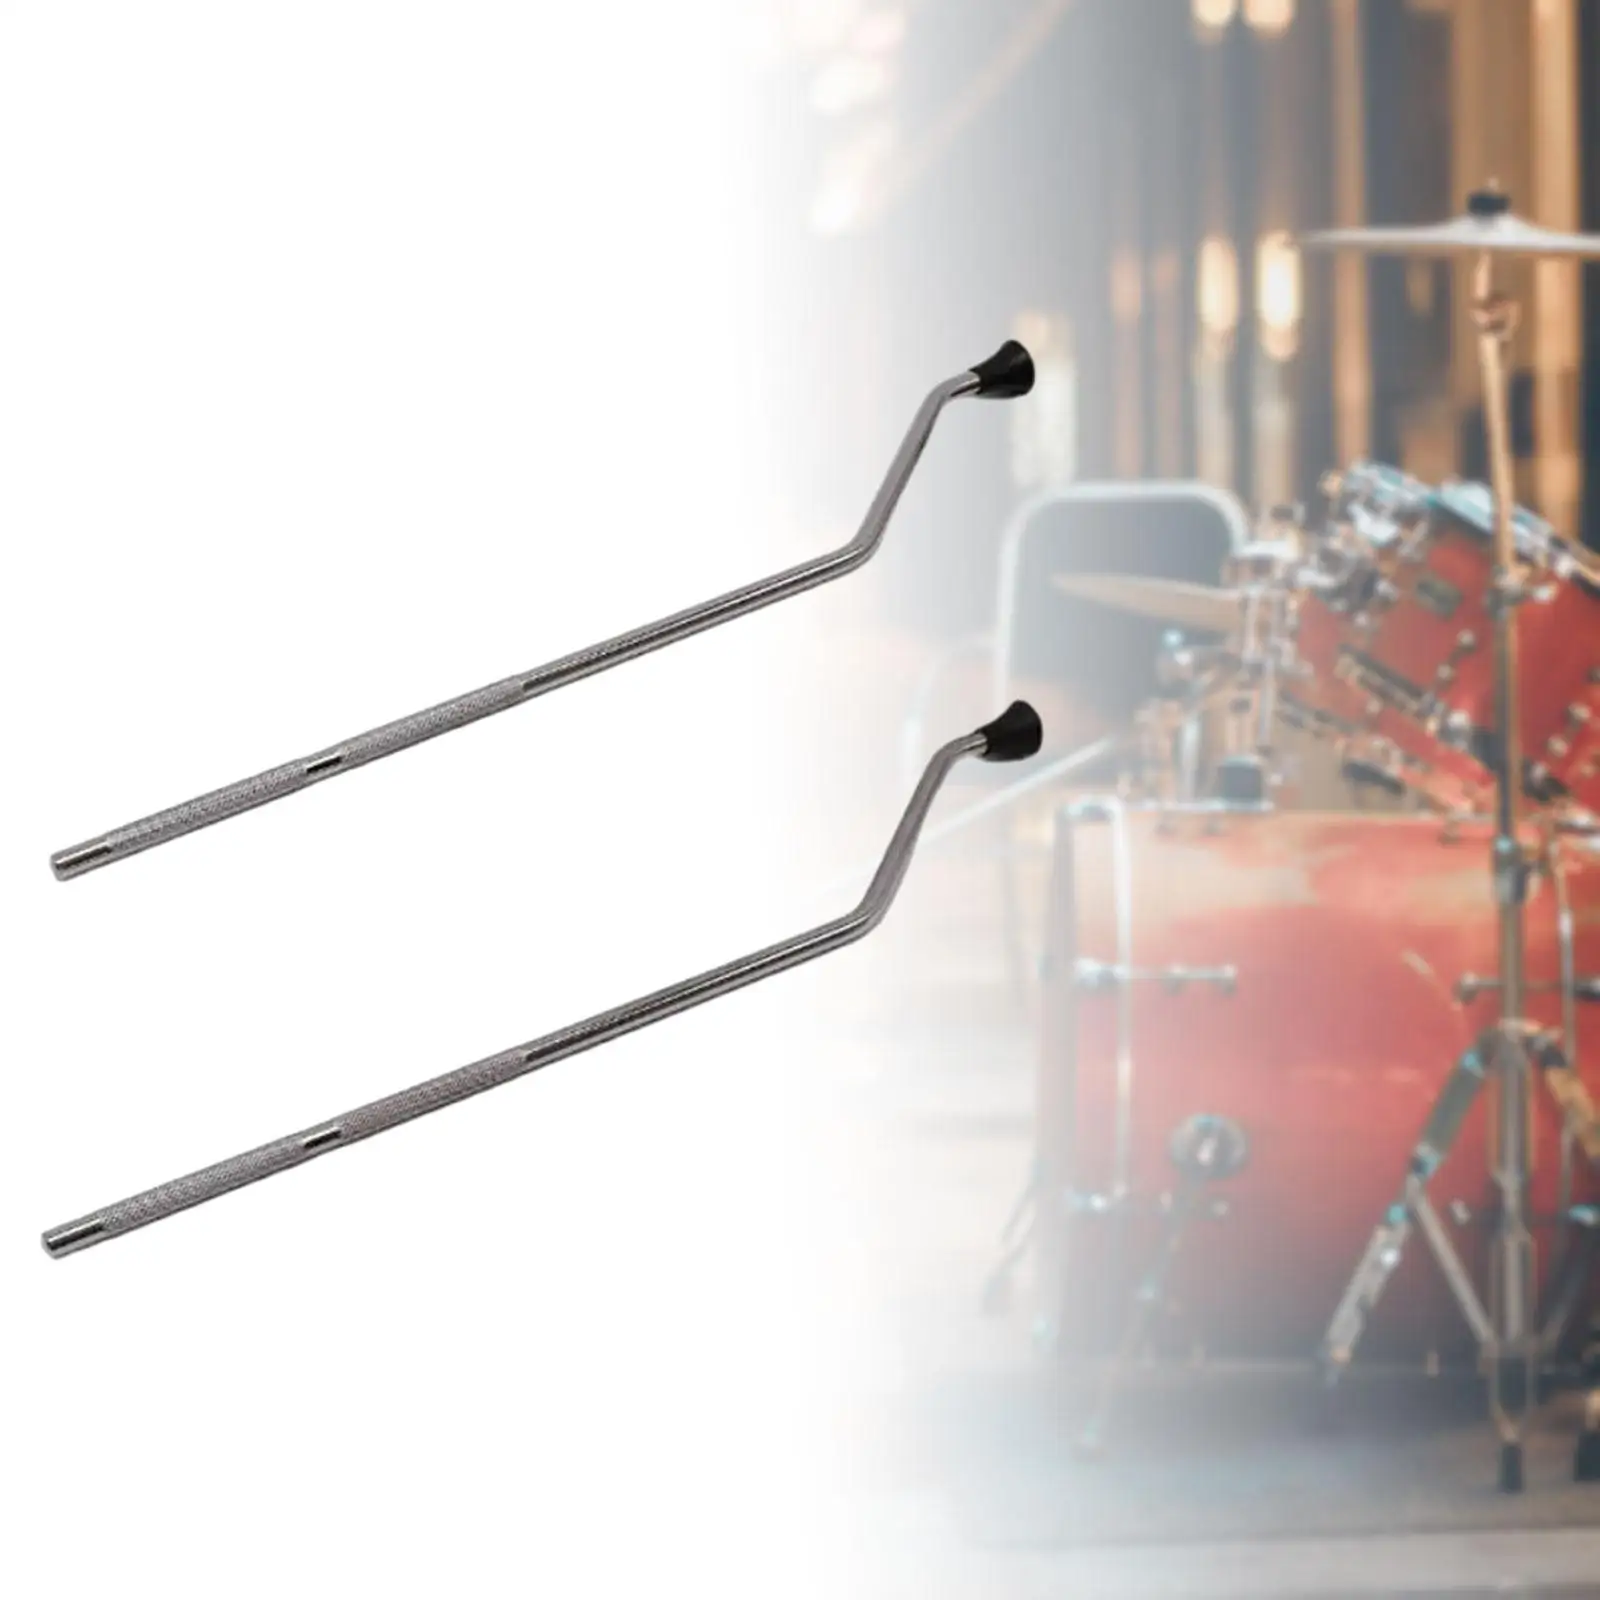 2x Bass Drum Legs Non Slip Durable Sturdy (48cm Length) Brackets Easy to Install Metal Support Rack Percussion Parts Drum Parts